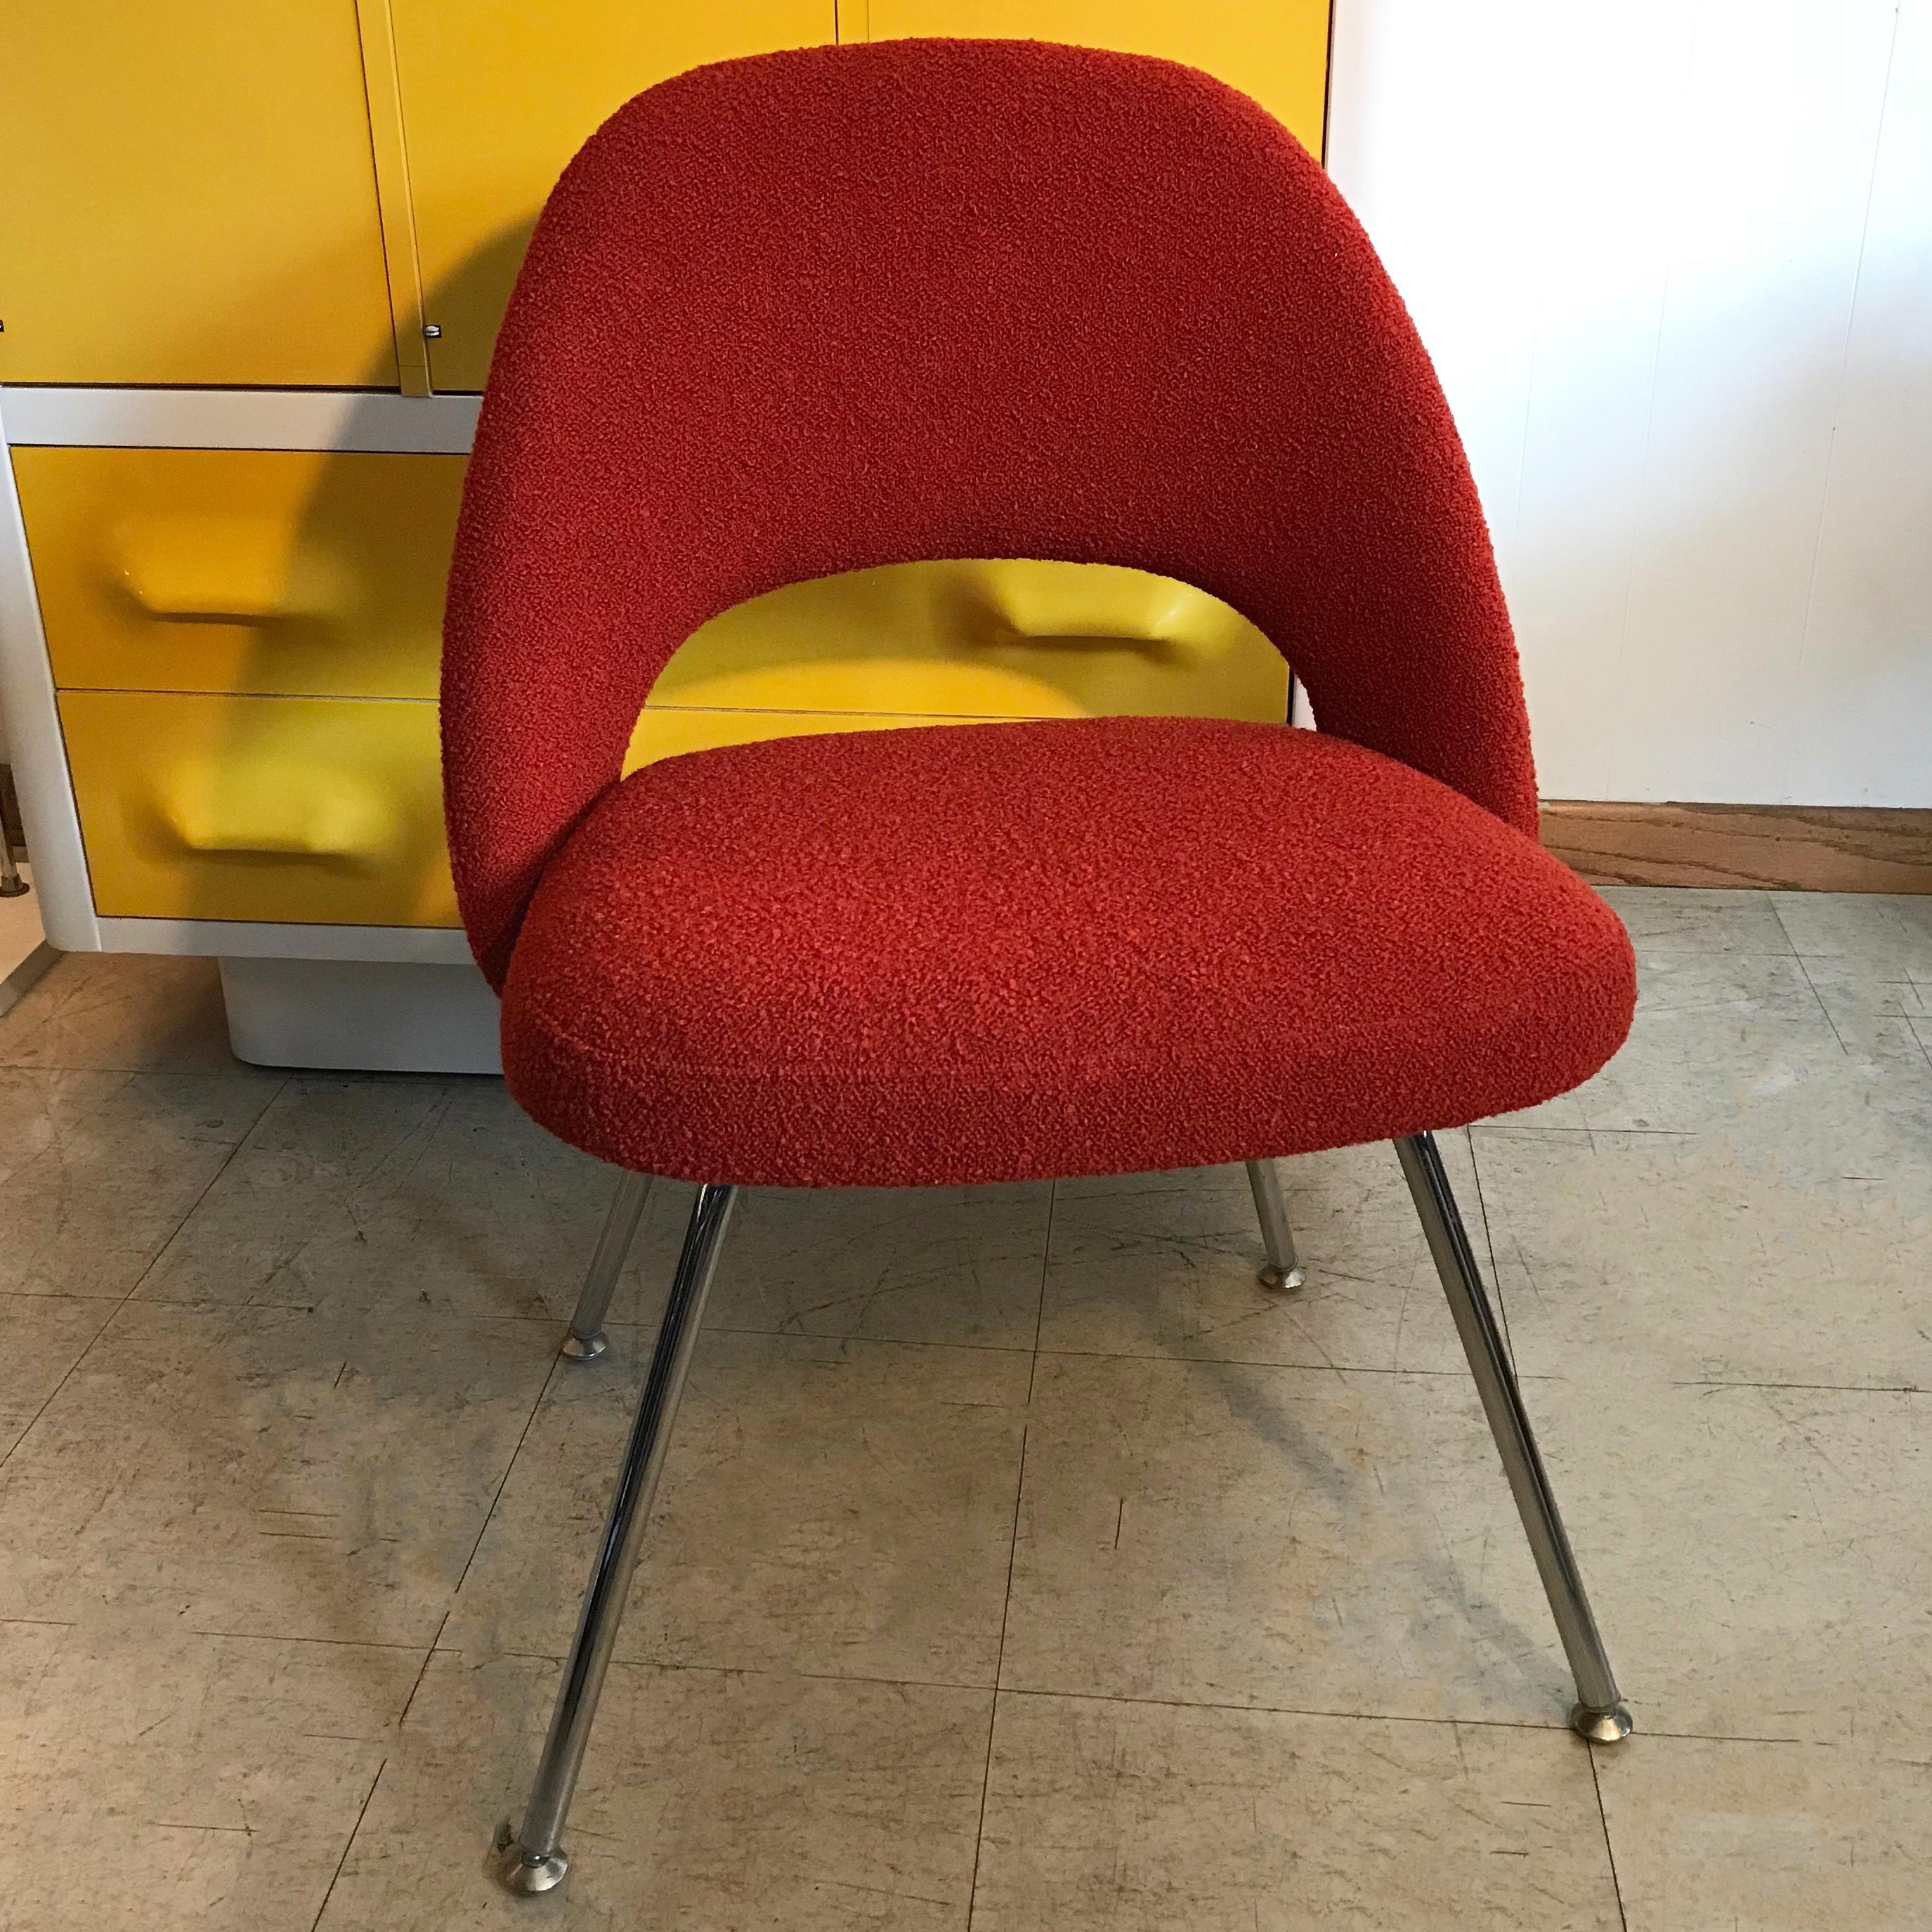 Mid-Century Modern, armless side chair by Eero Saarinen for Knoll features chrome legs with original glides and is newly upholstered in paprika red, nubby wool blend fabric.